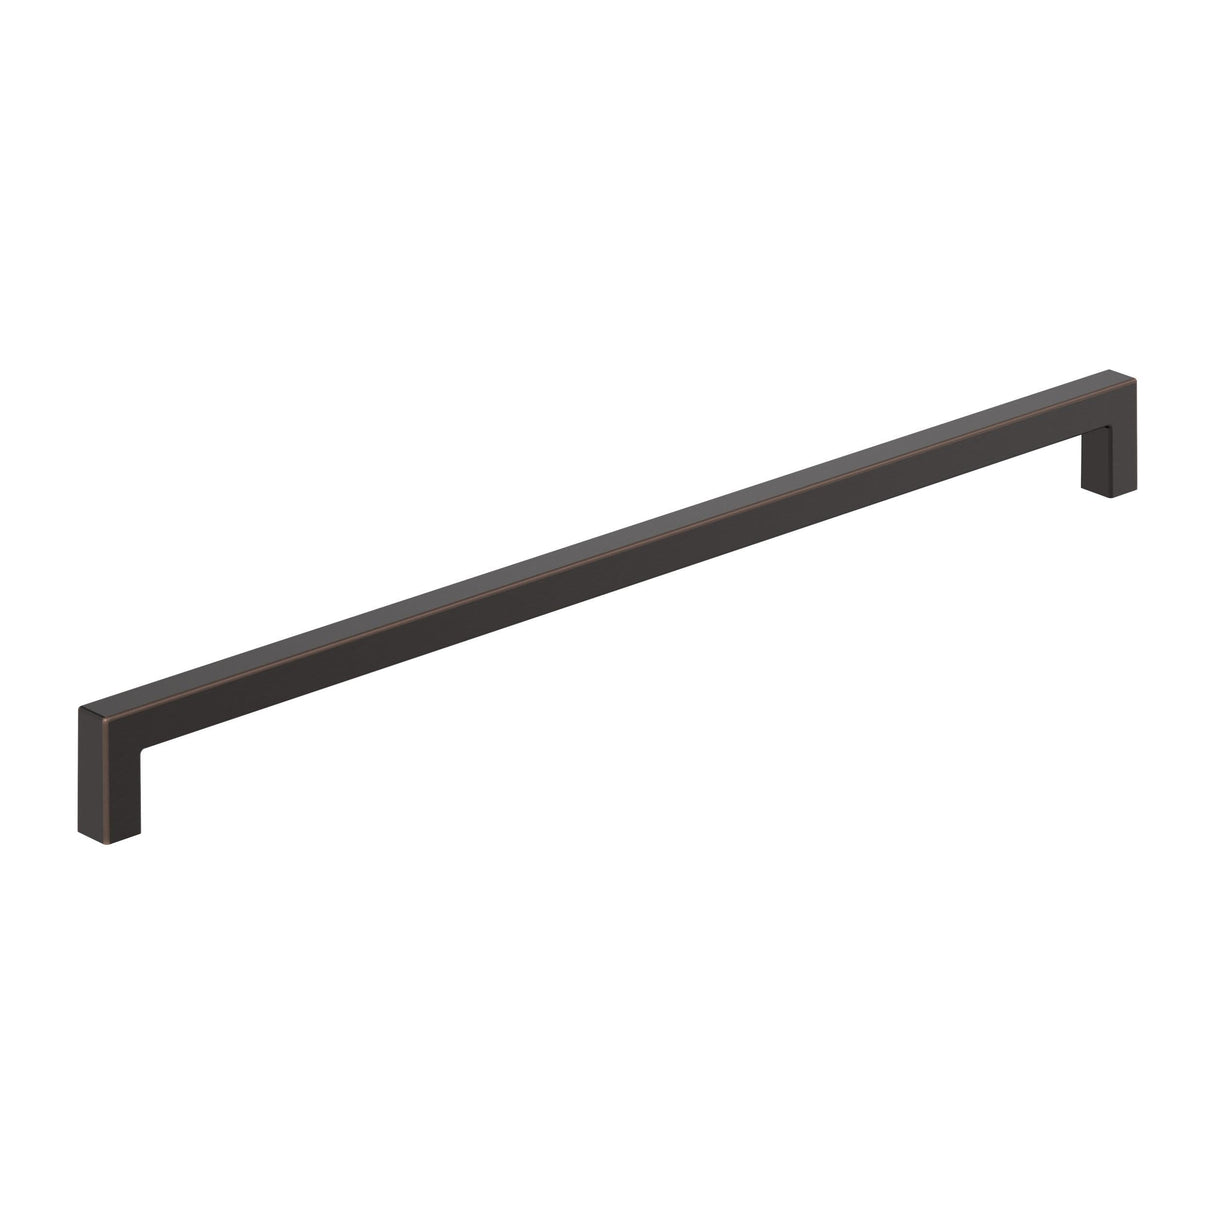 Amerock BP36911ORB Oil-Rubbed Bronze Cabinet Pull 12-5/8 inch (320mm) Center-to-Center Cabinet Hardware Monument Furniture Hardware Drawer Pull